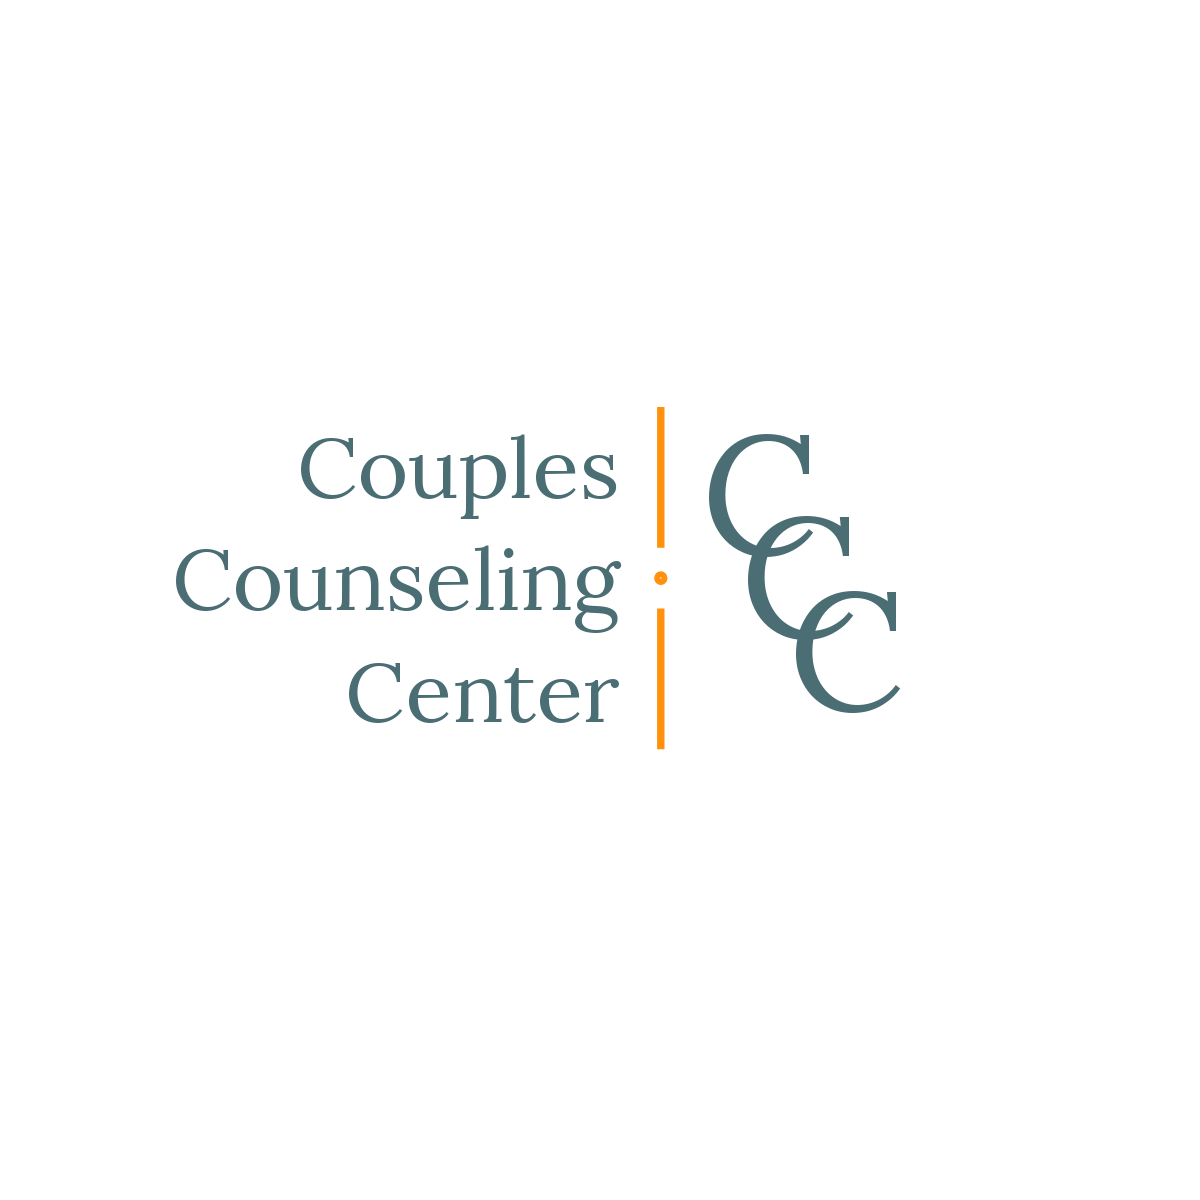 Couples Counseling Center